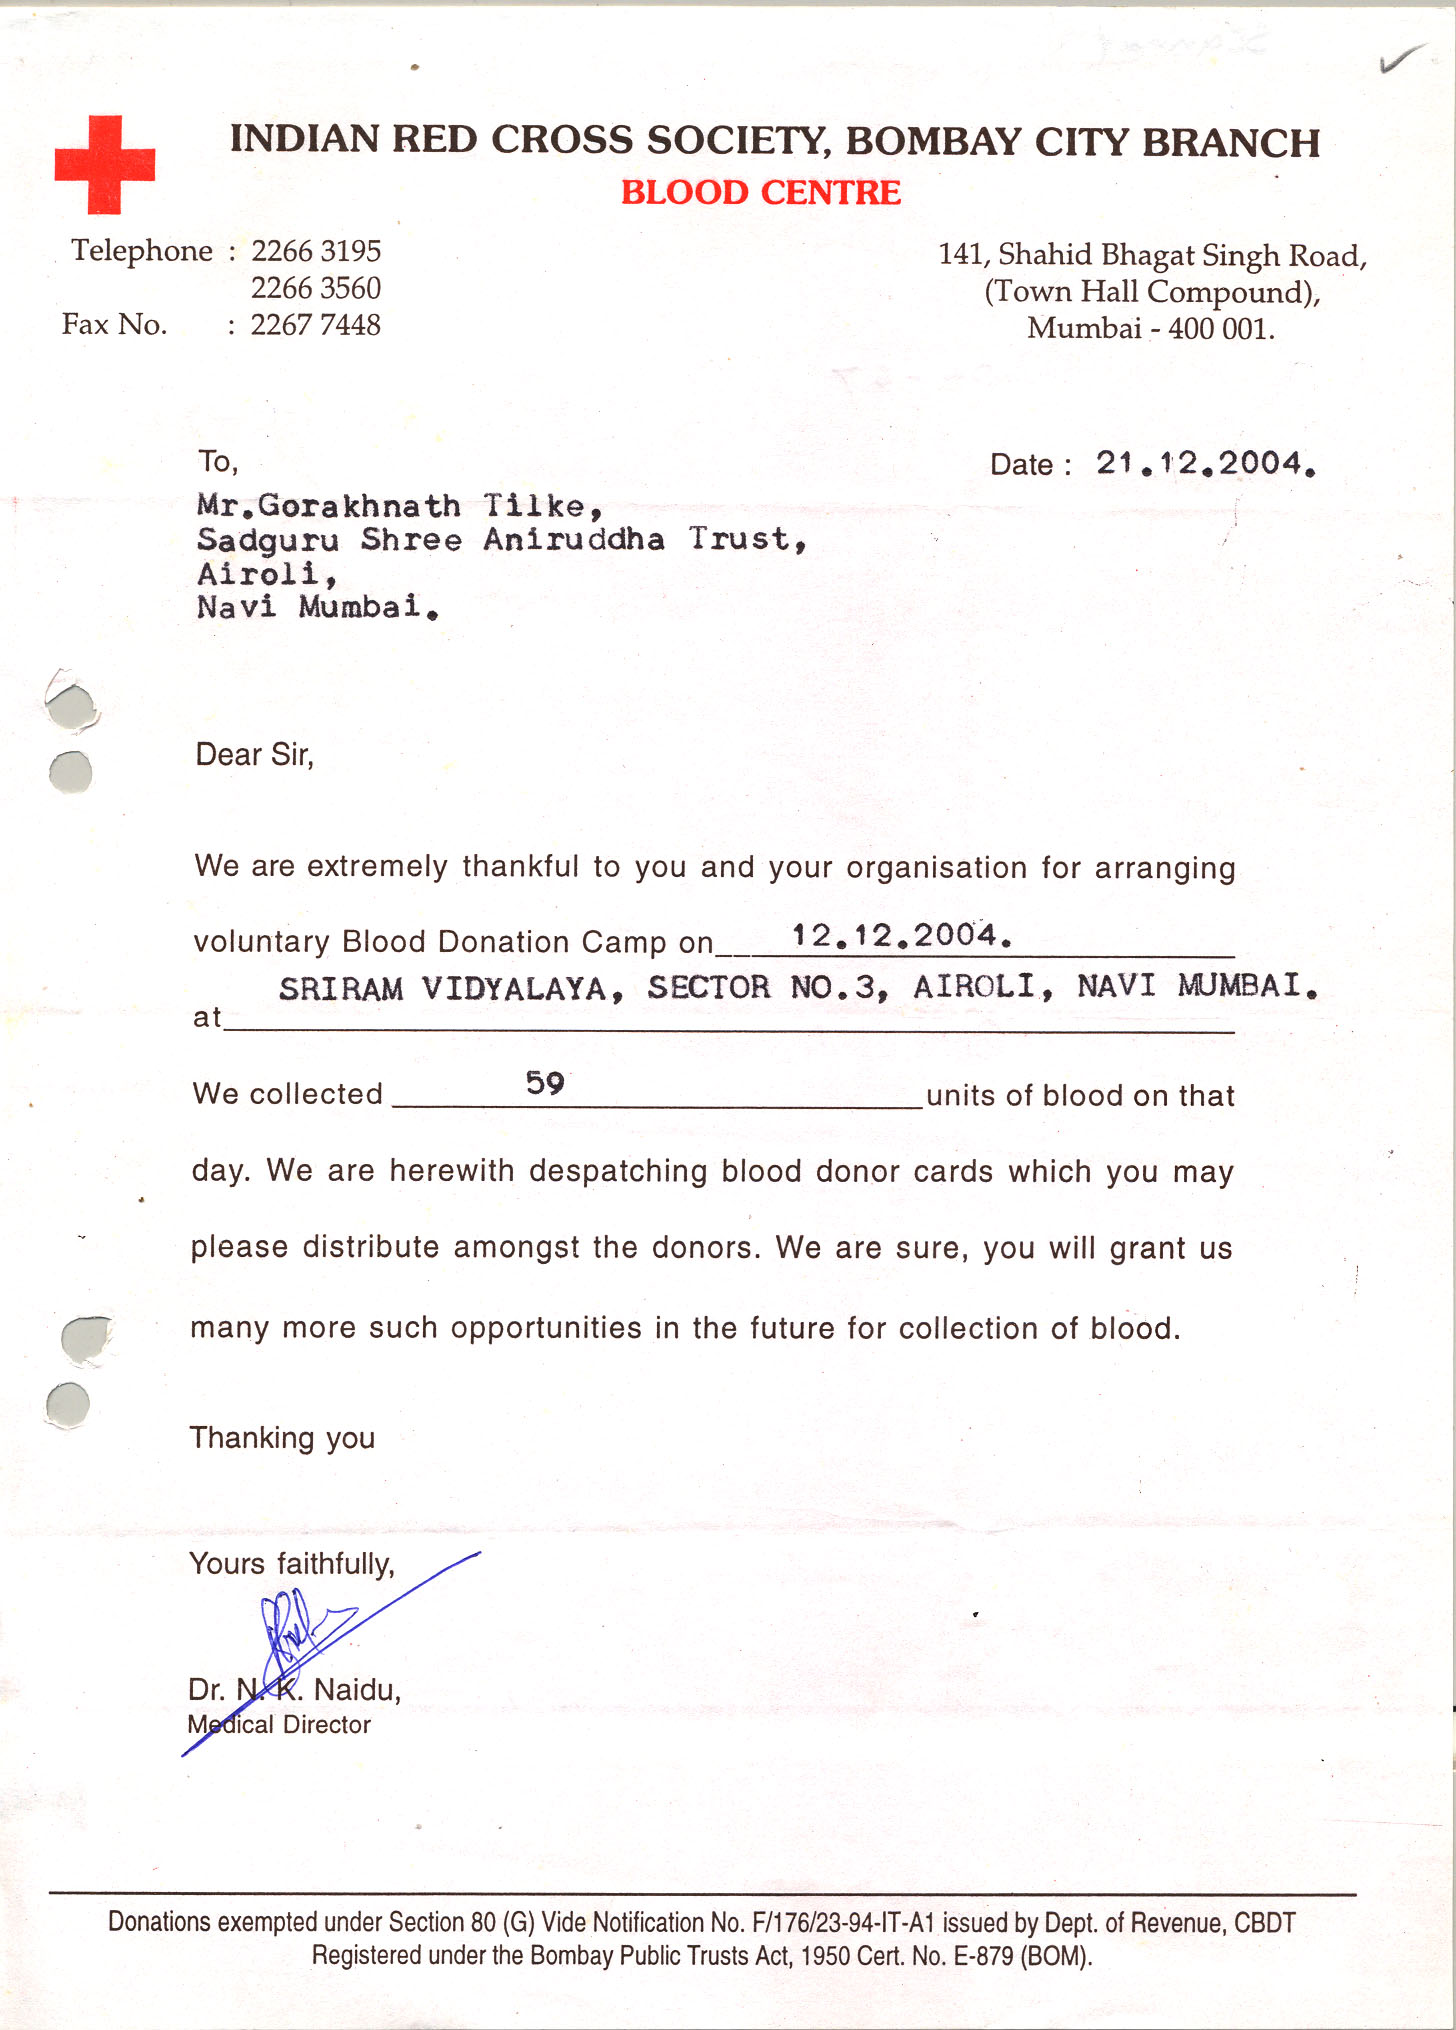 Appreciation-Letter from Indian Red Cross Soc 2004-for-Aniruddhafoundation-Compassion-Social-services